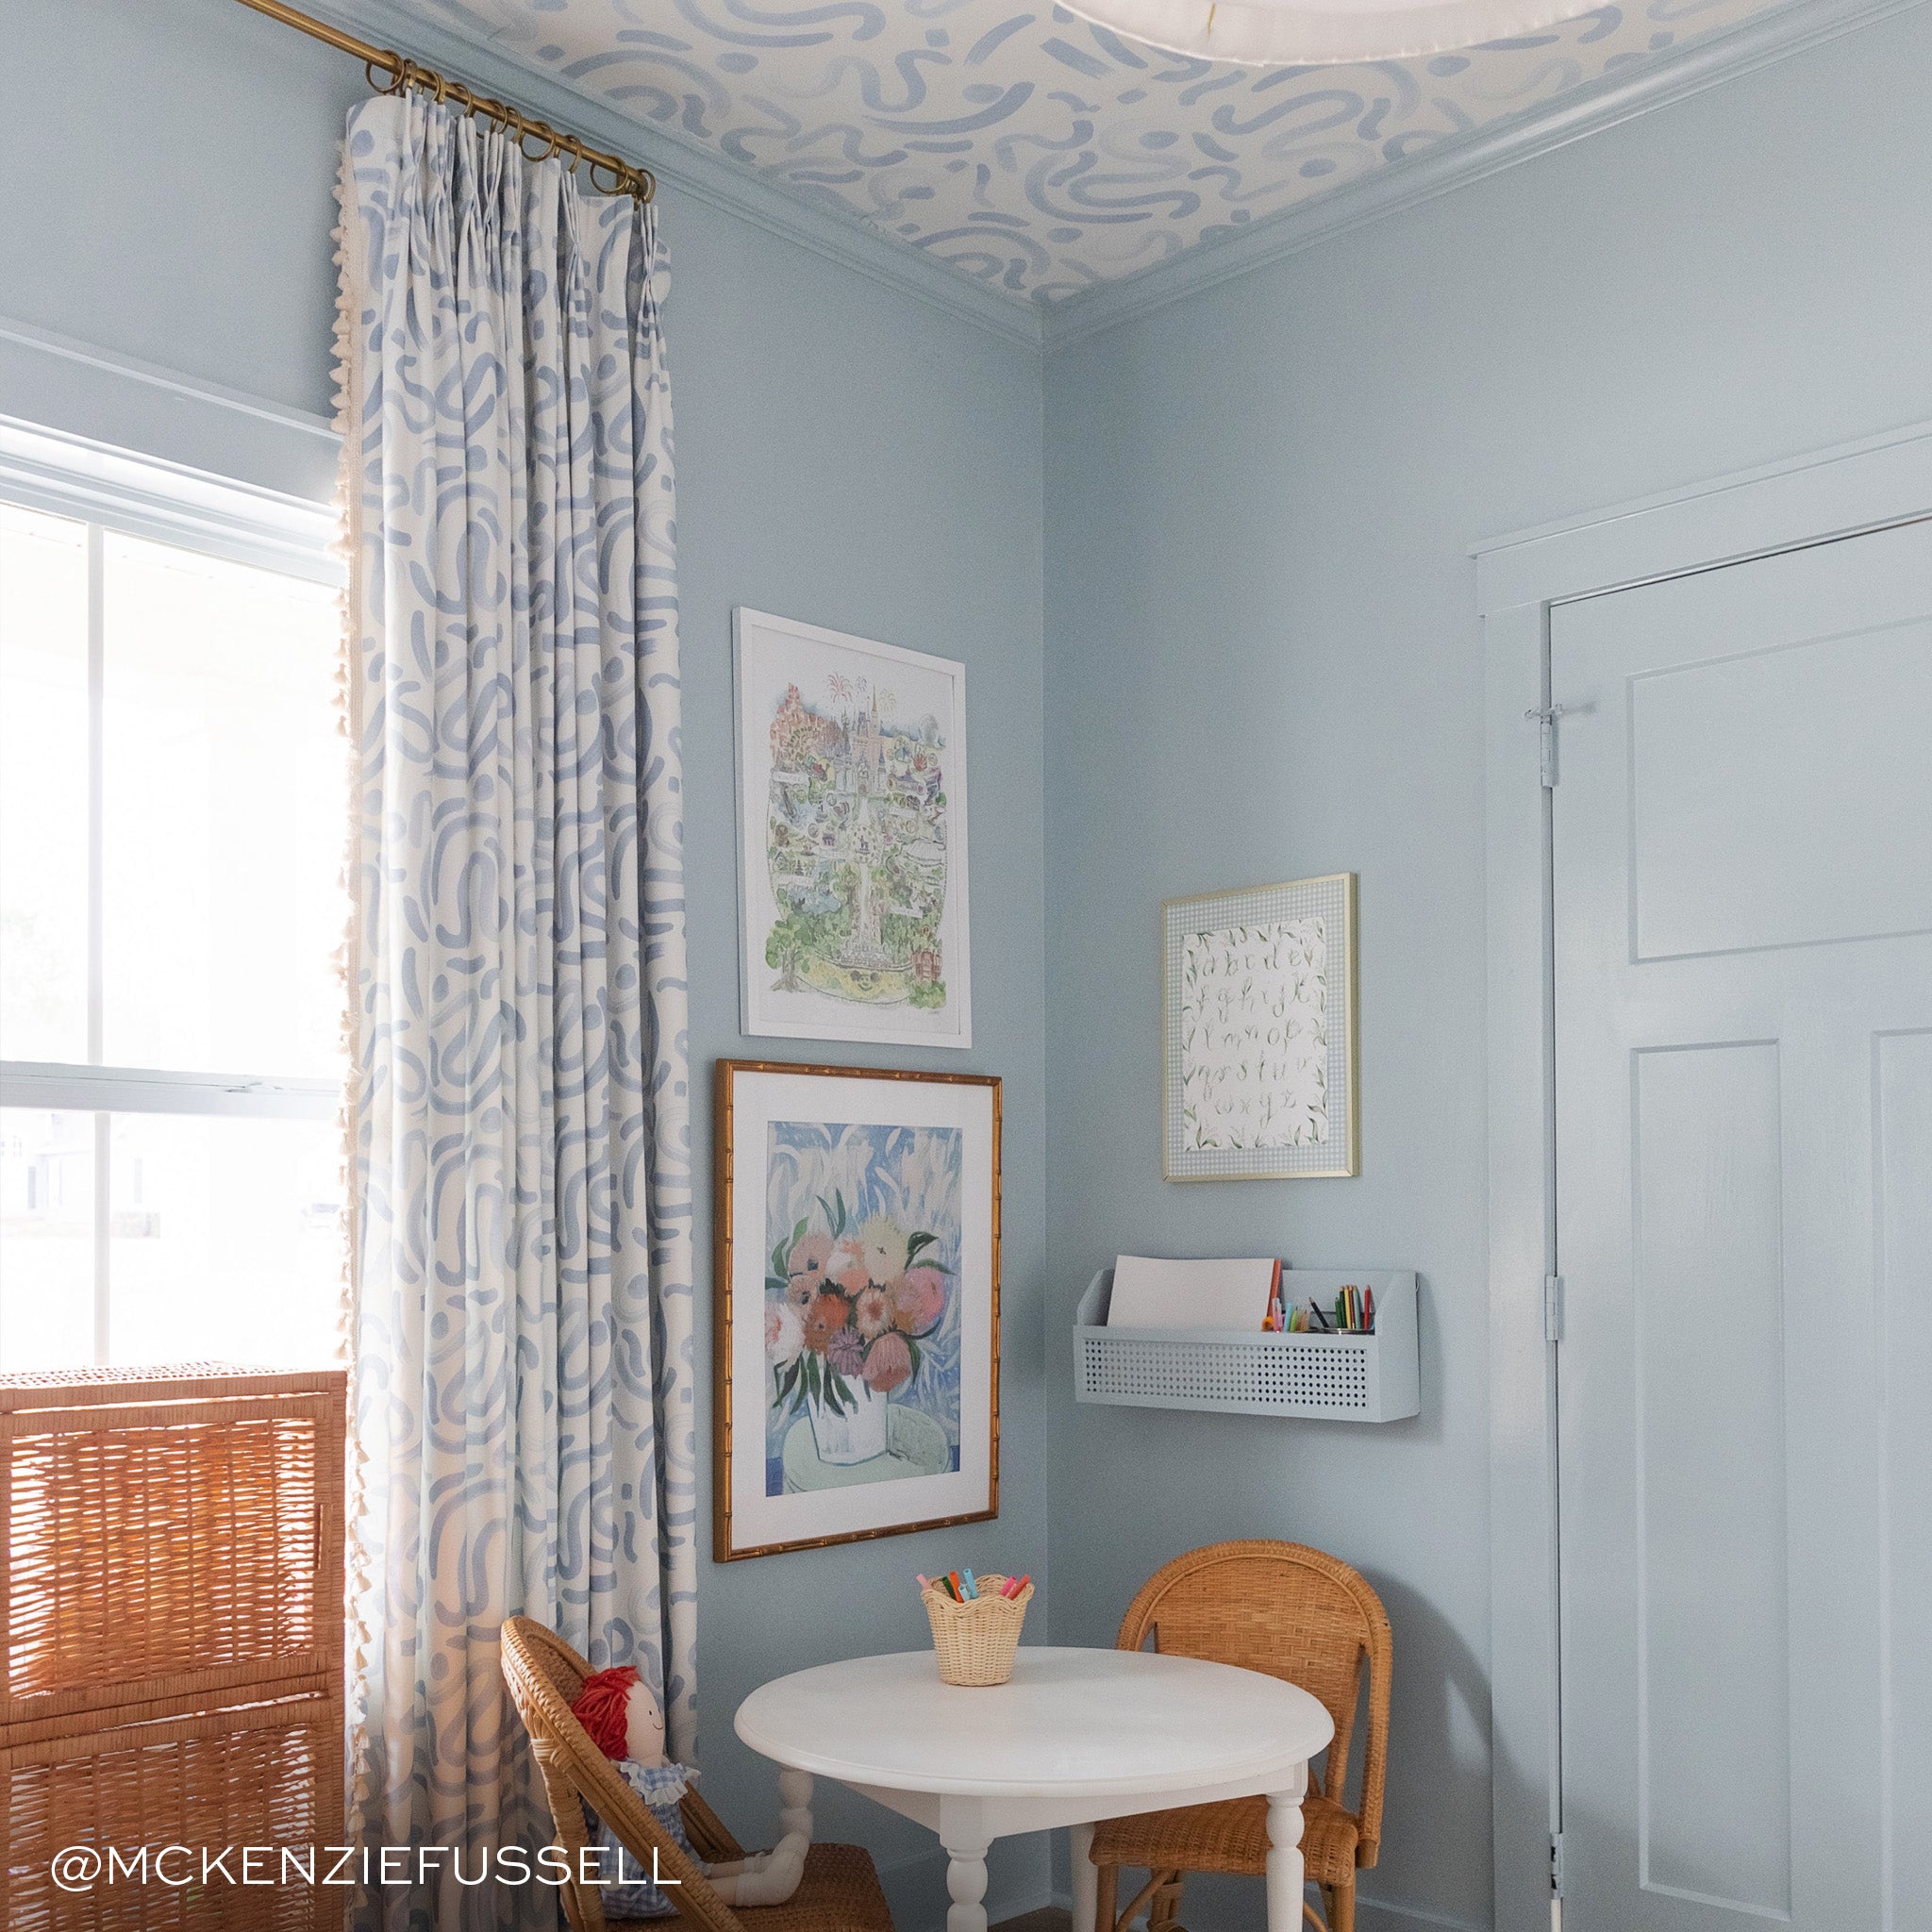 sky blue abstract curtains hung on a metal rod in front of an illuminated window in a room with light blue walls and sky blue patterned wallpaper on the ceiling  